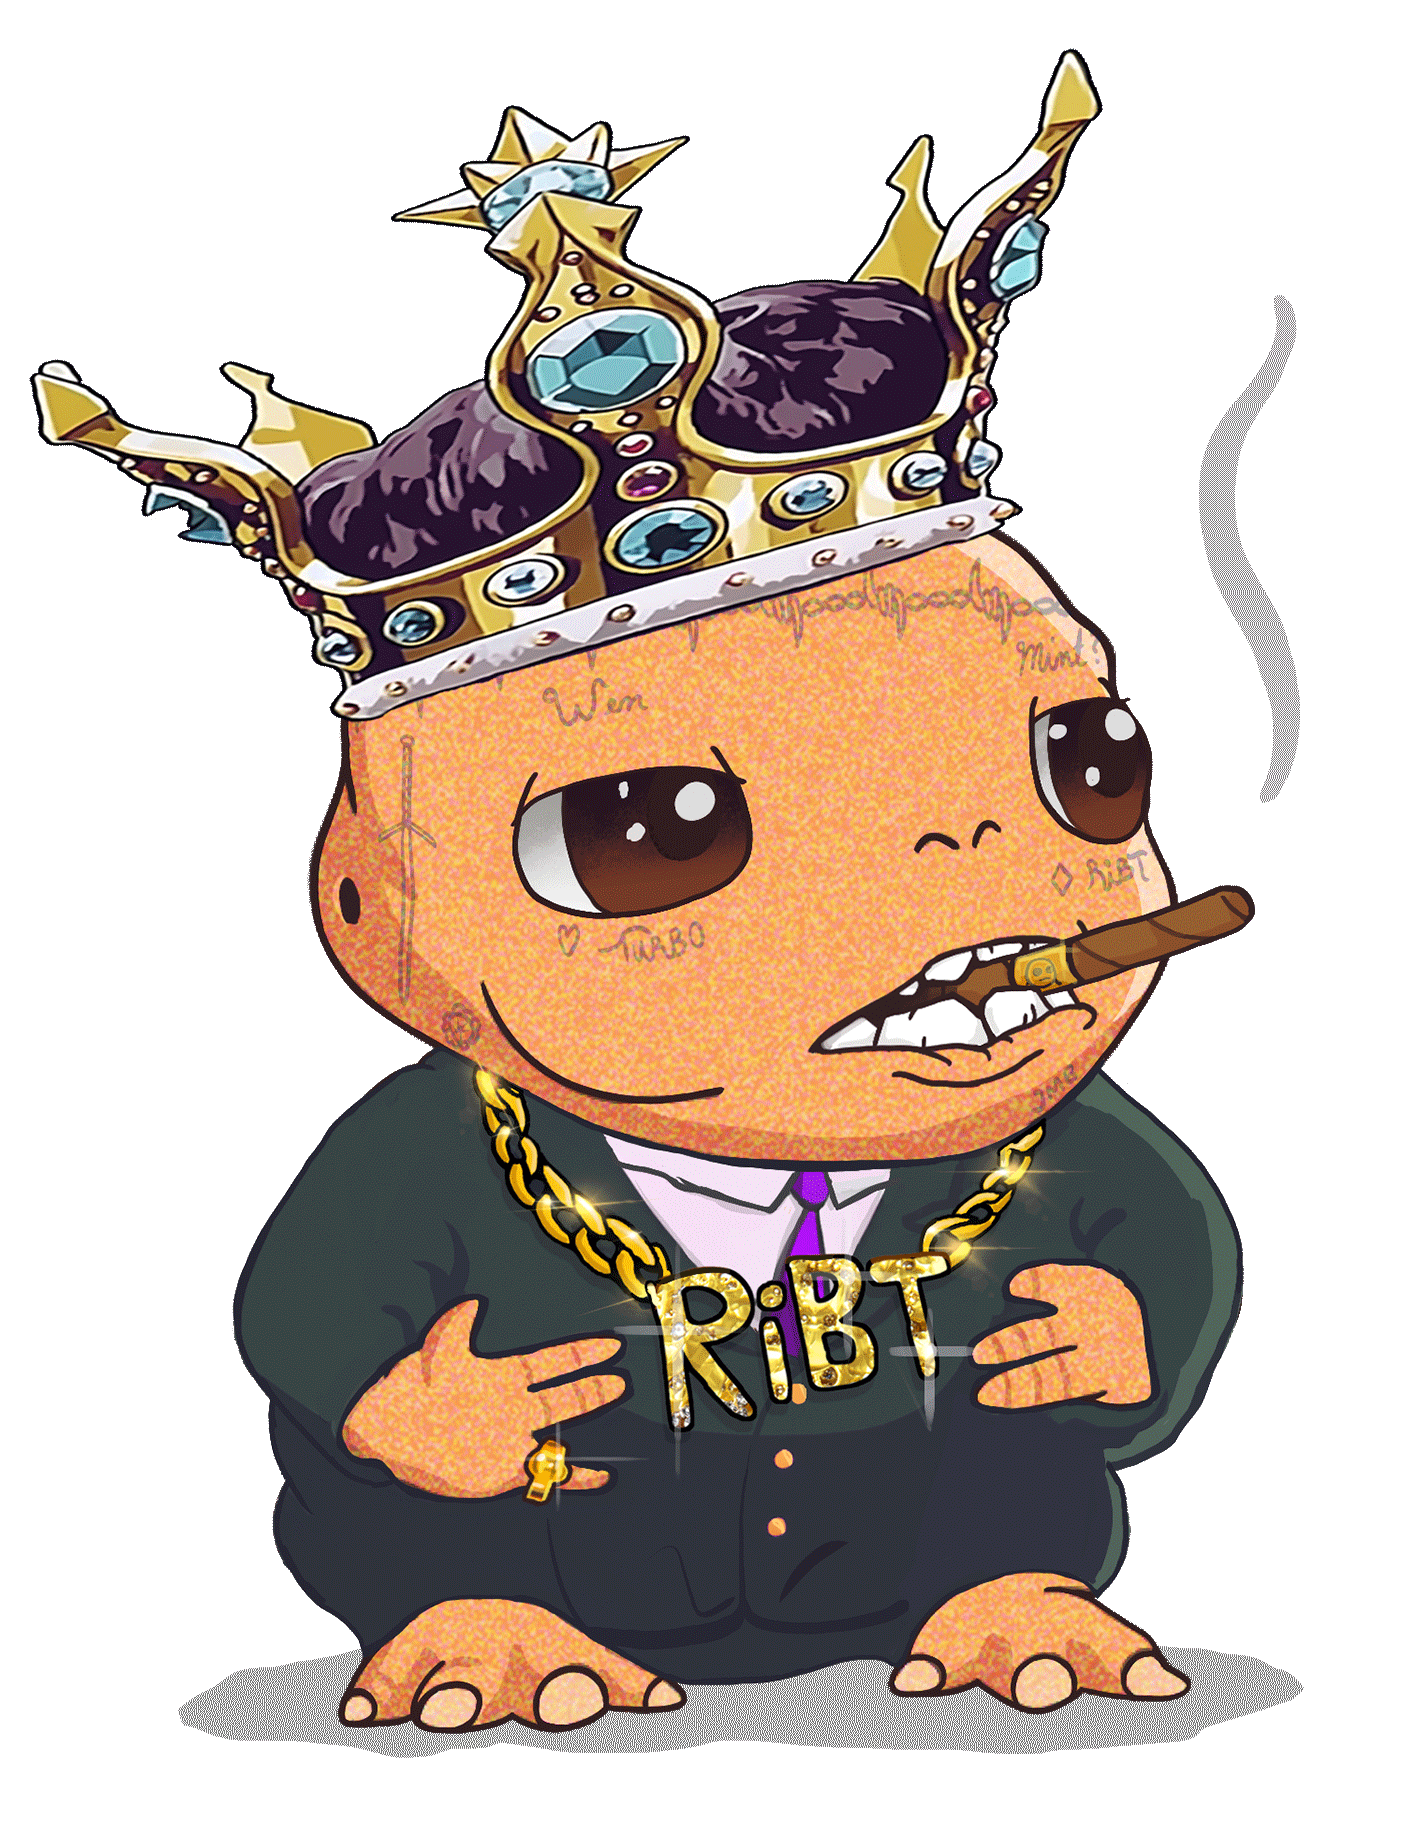 A gangsta RiBT smoking a cigar and wearing a suit and crown